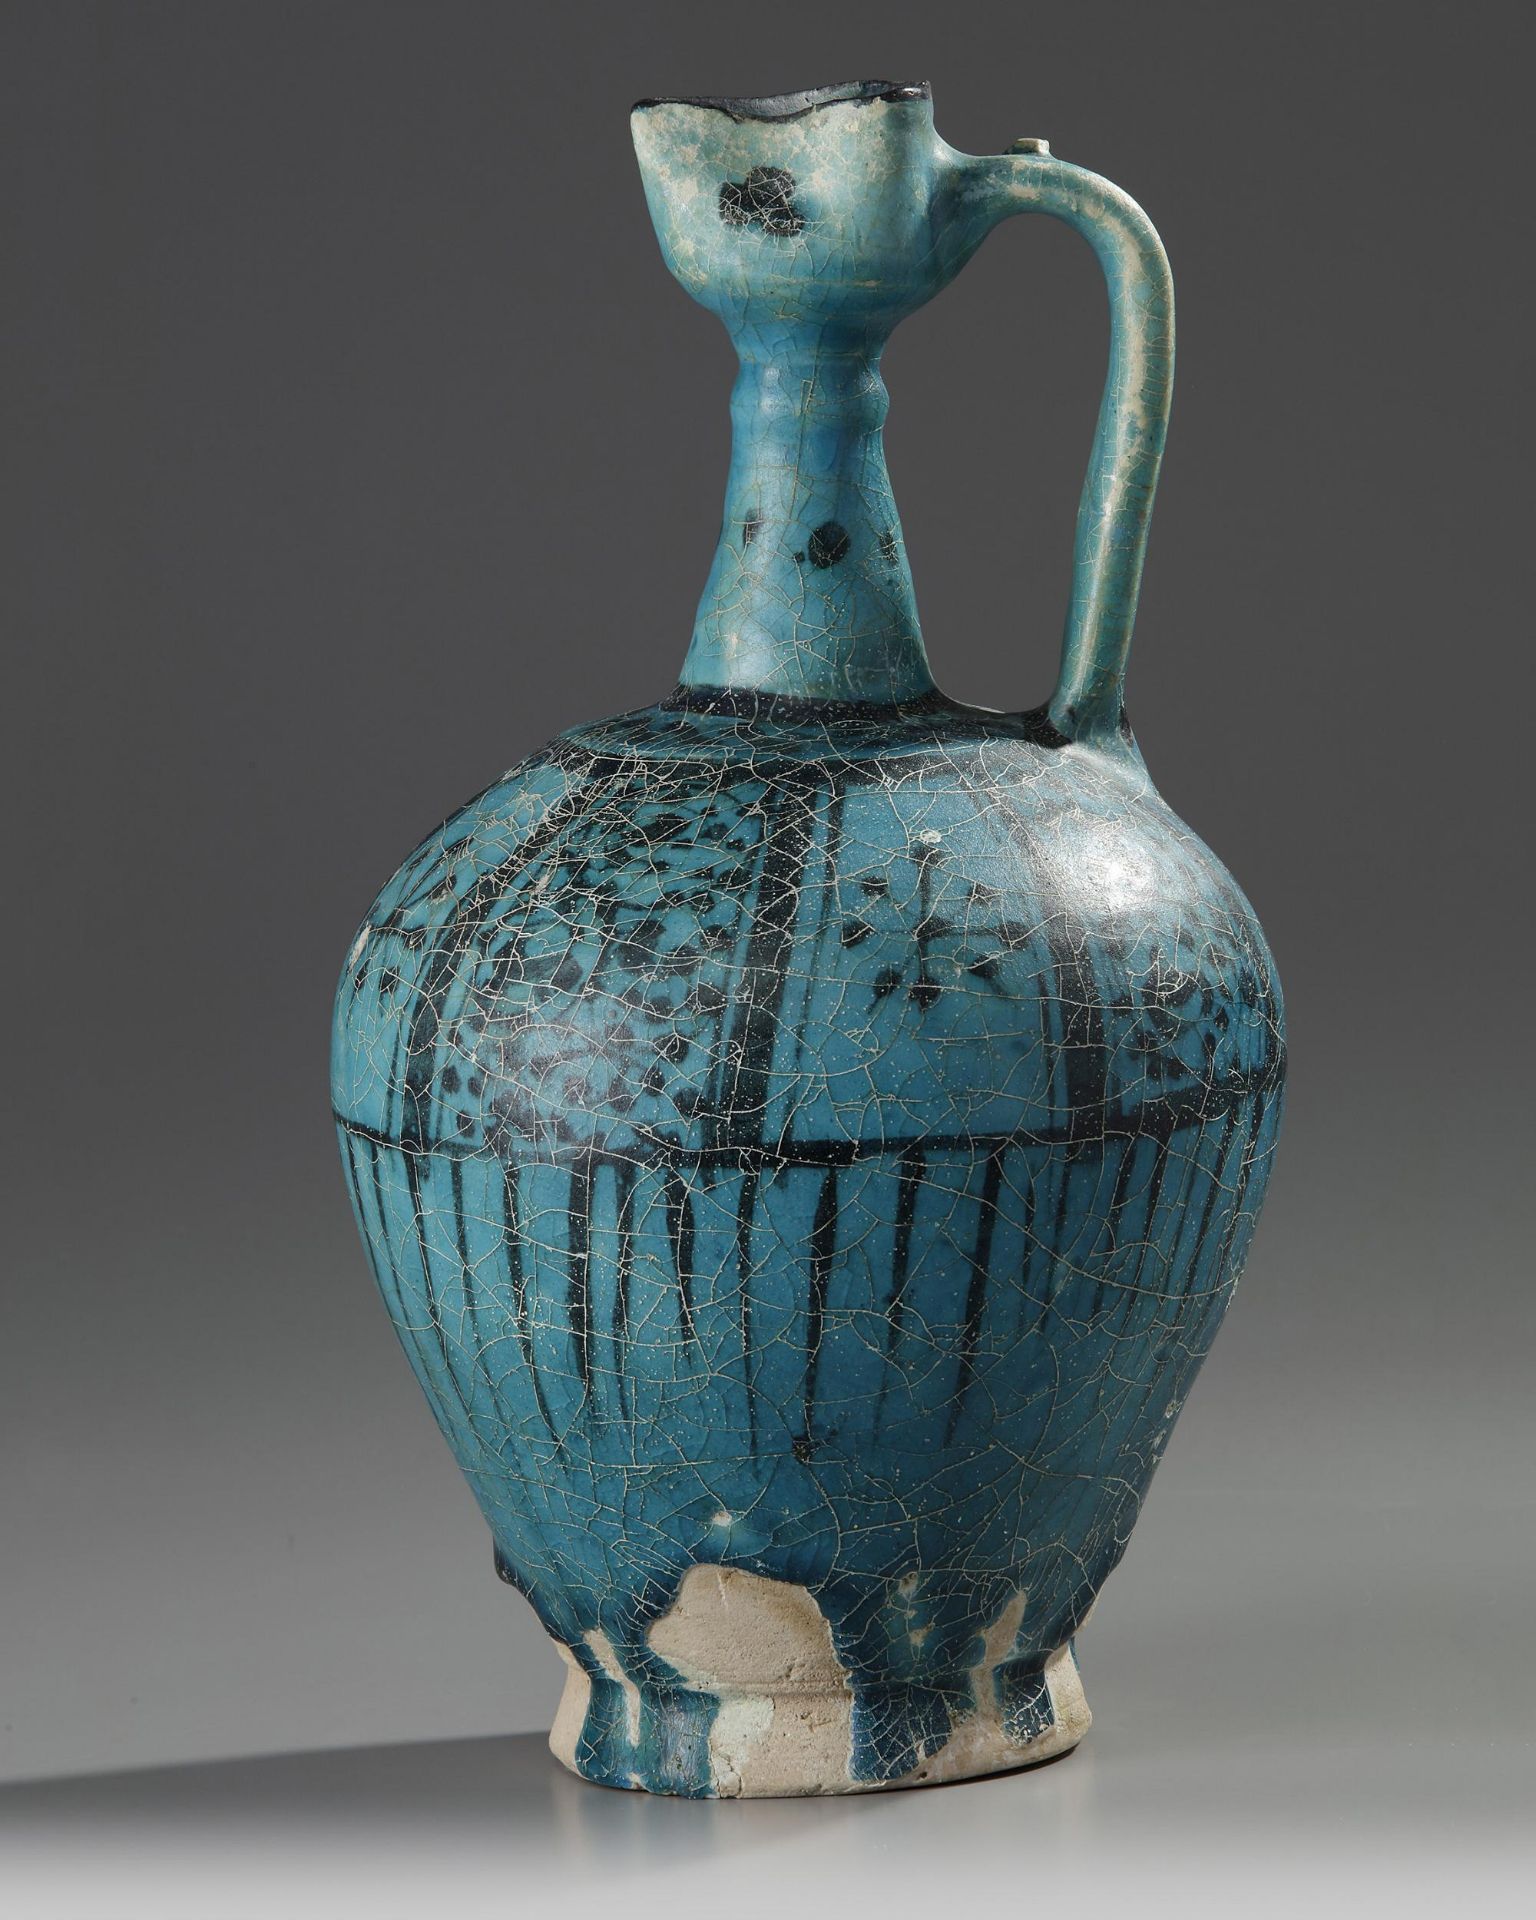 A LARGE RAQQA UNDERGLAZE PAINTED POTTERY EWER, SYRIA, 12TH-13TH CENTURY - Image 5 of 5